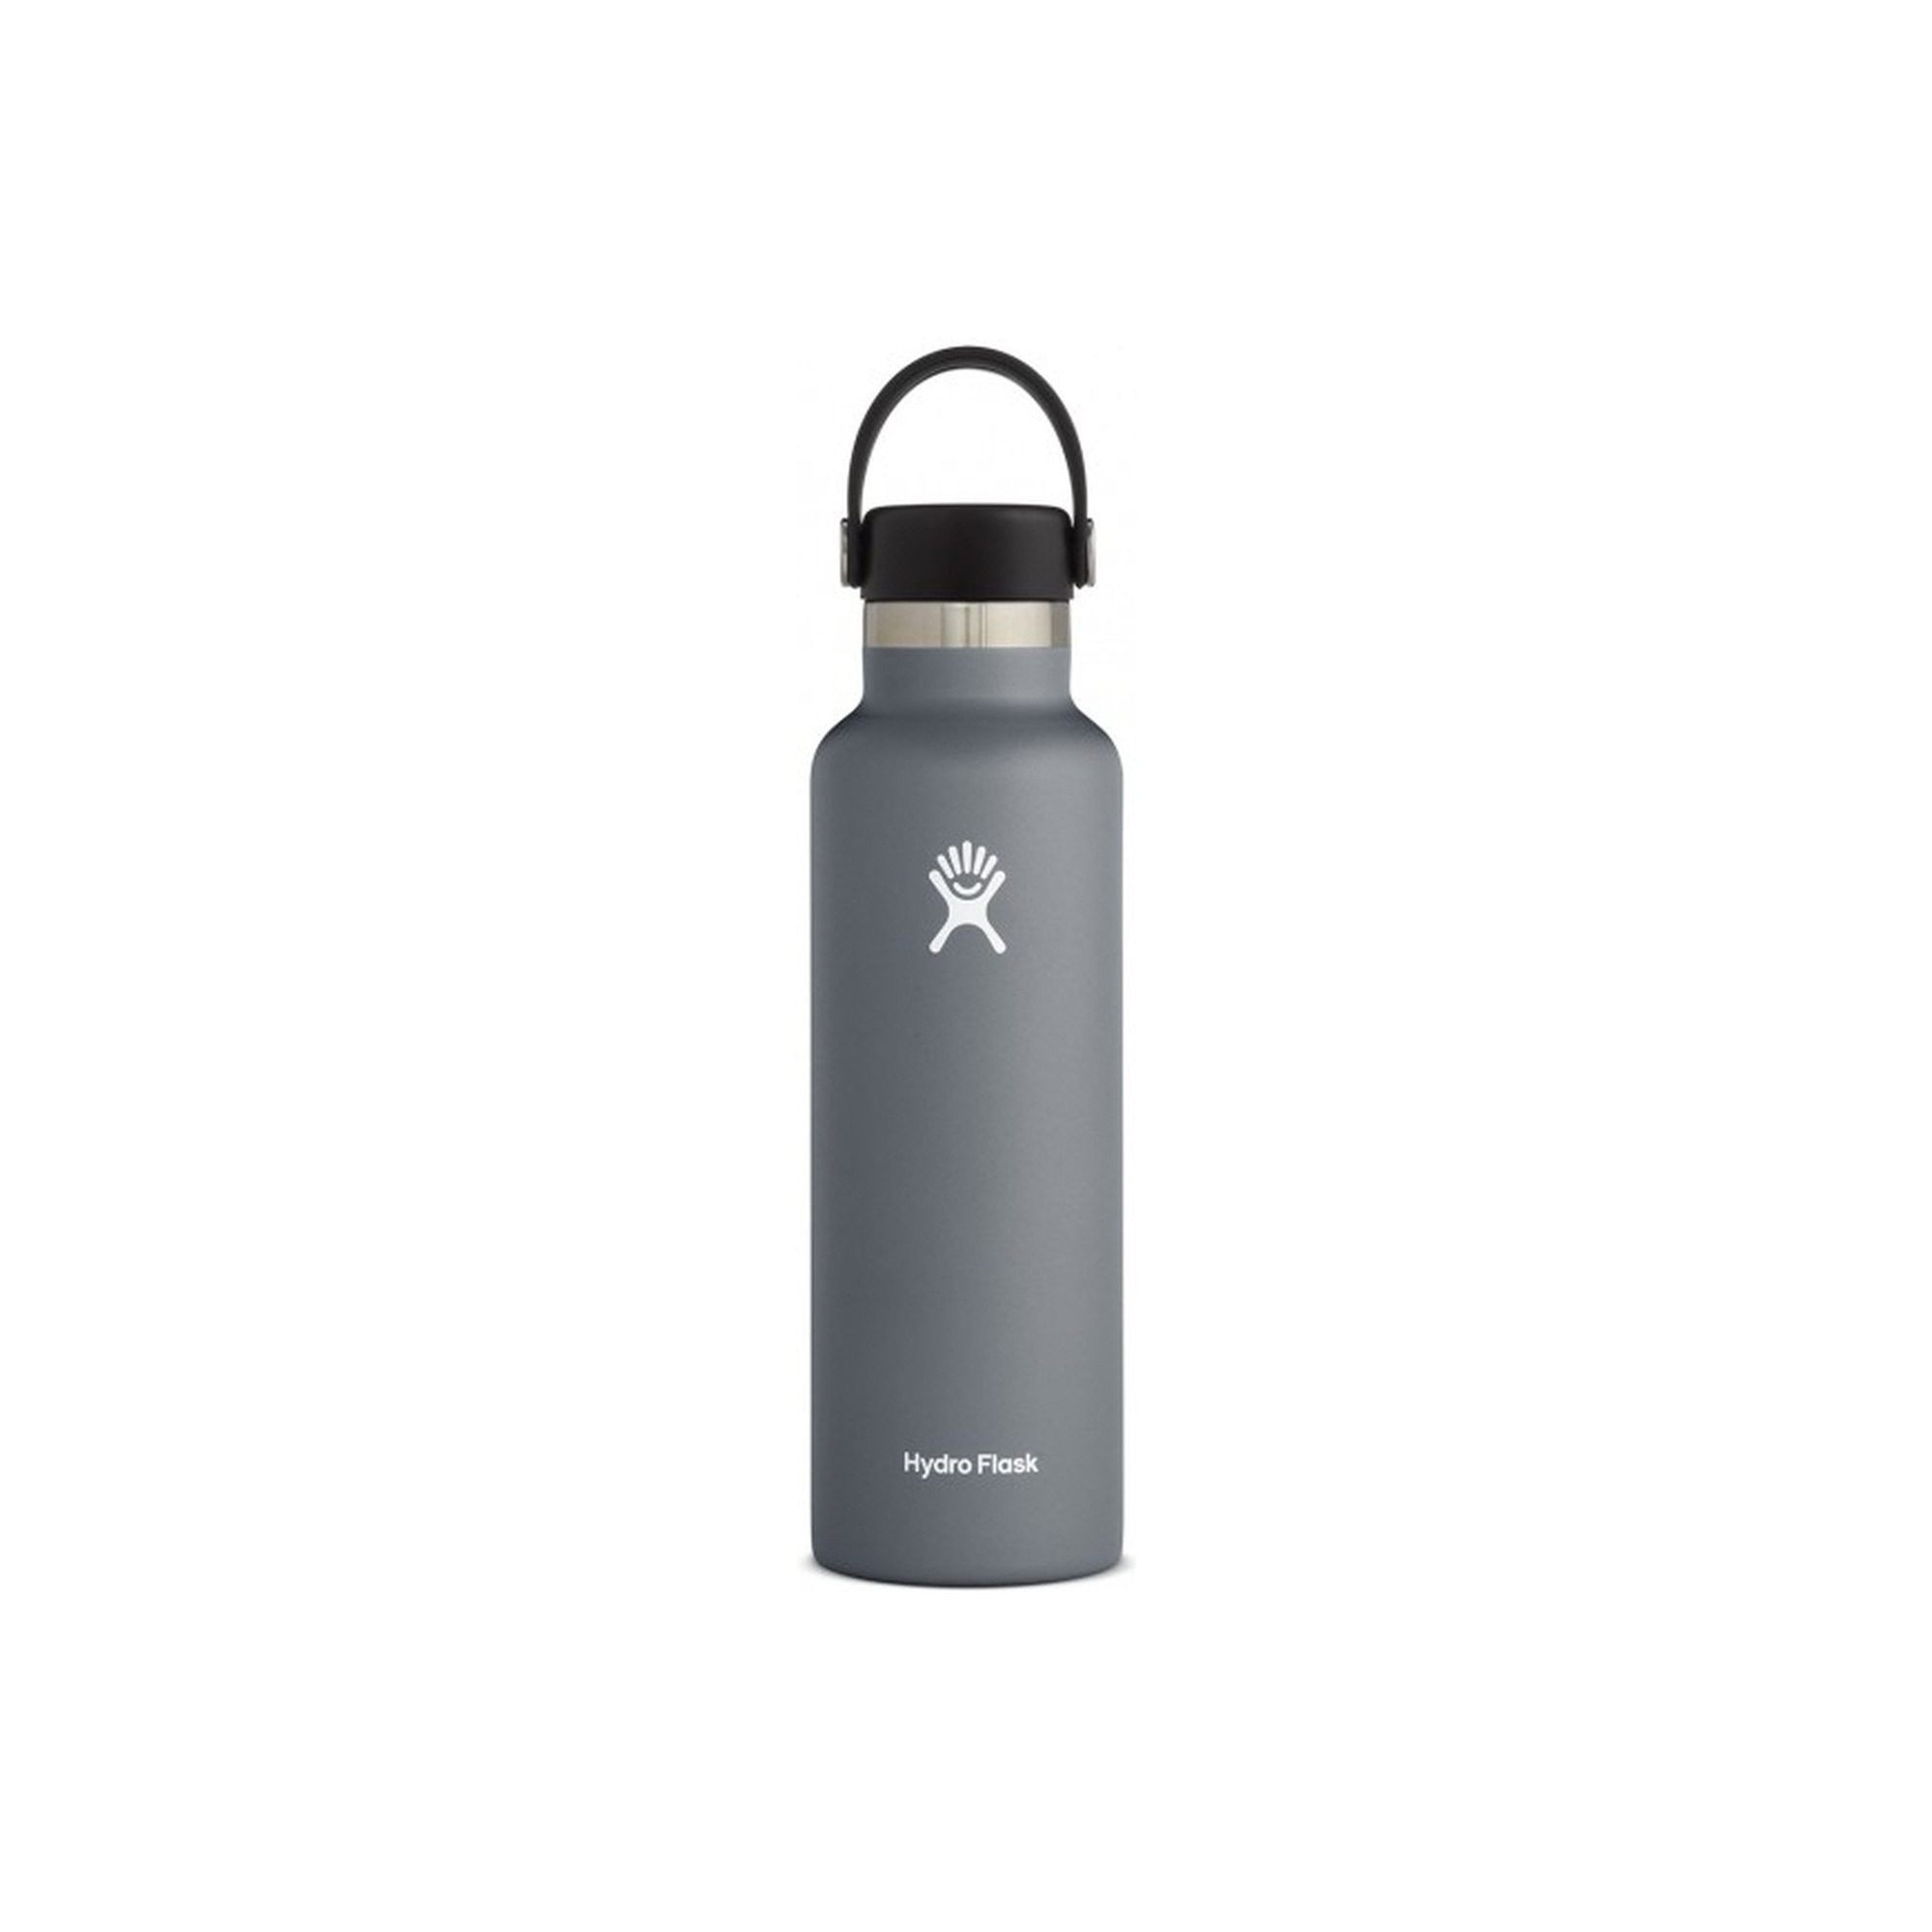 Thermos standard Hydro Flask with standard mouth flew cap 21 oz